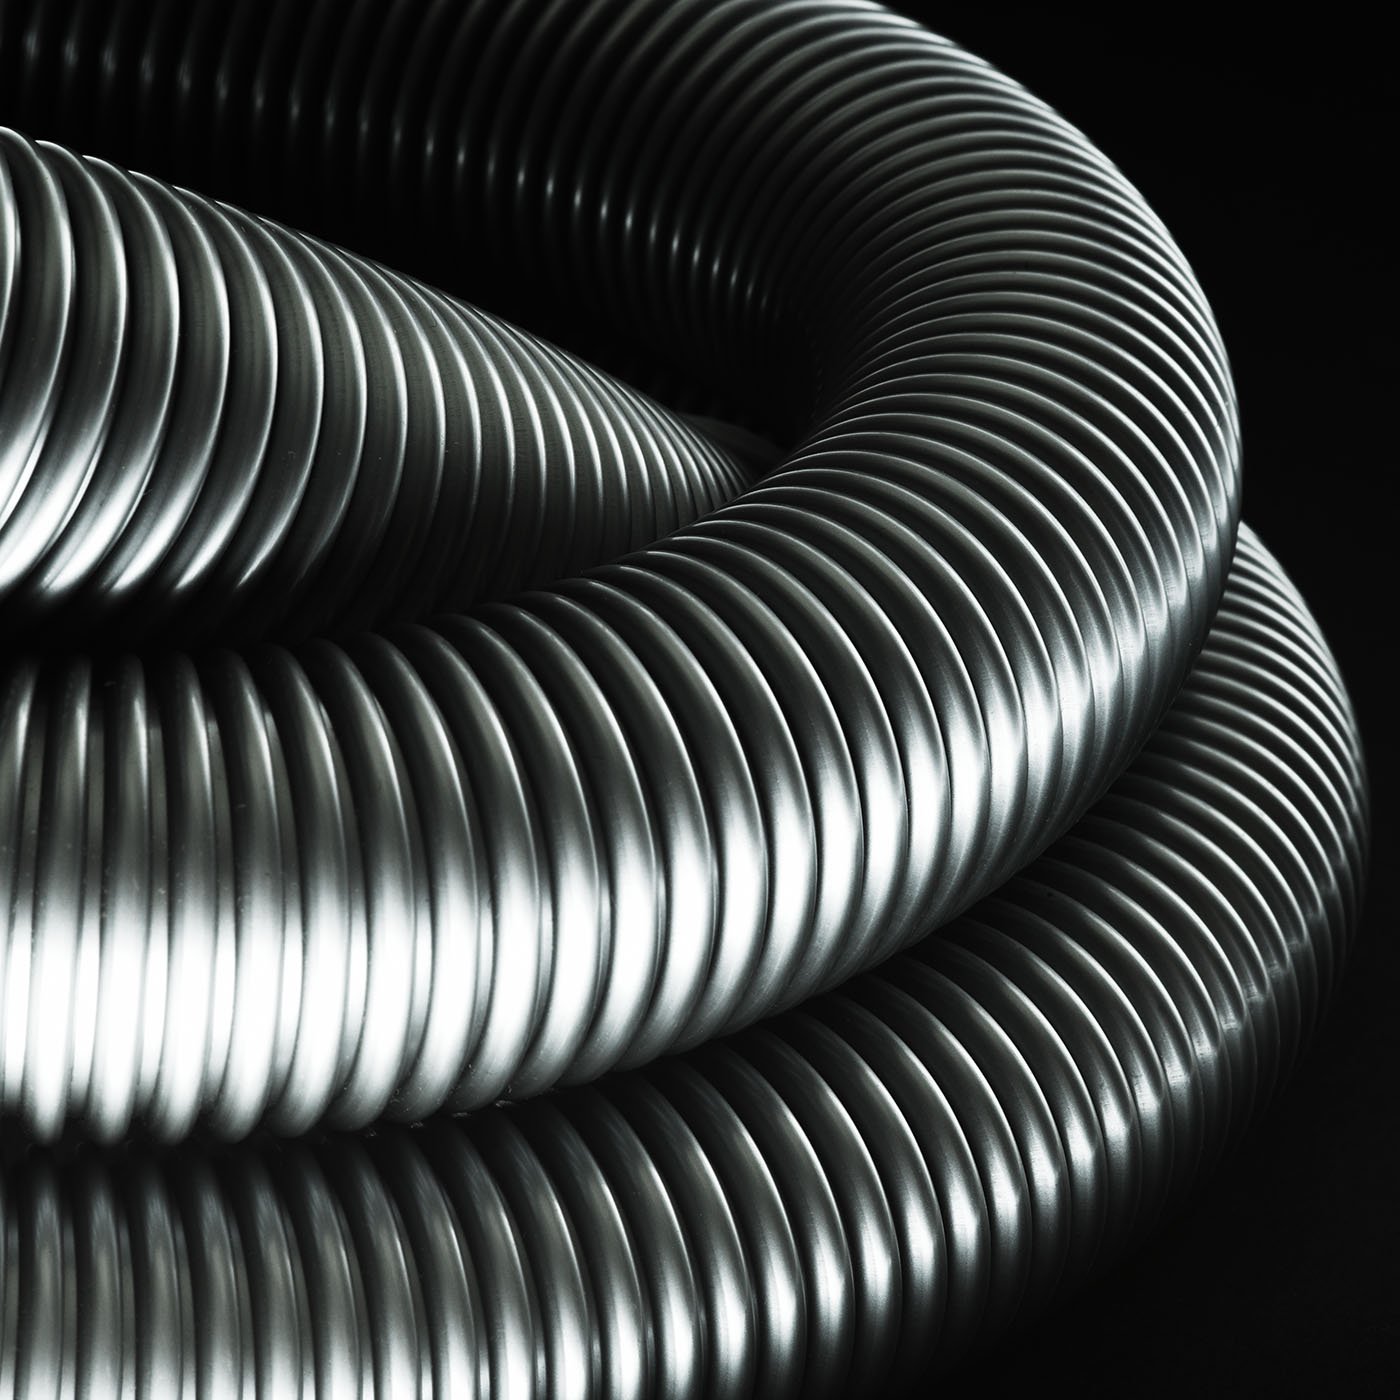  A Detailed close up photograph of a Dyson Vacuum cleaner photographed on a black back ground creating an abstract shape. 